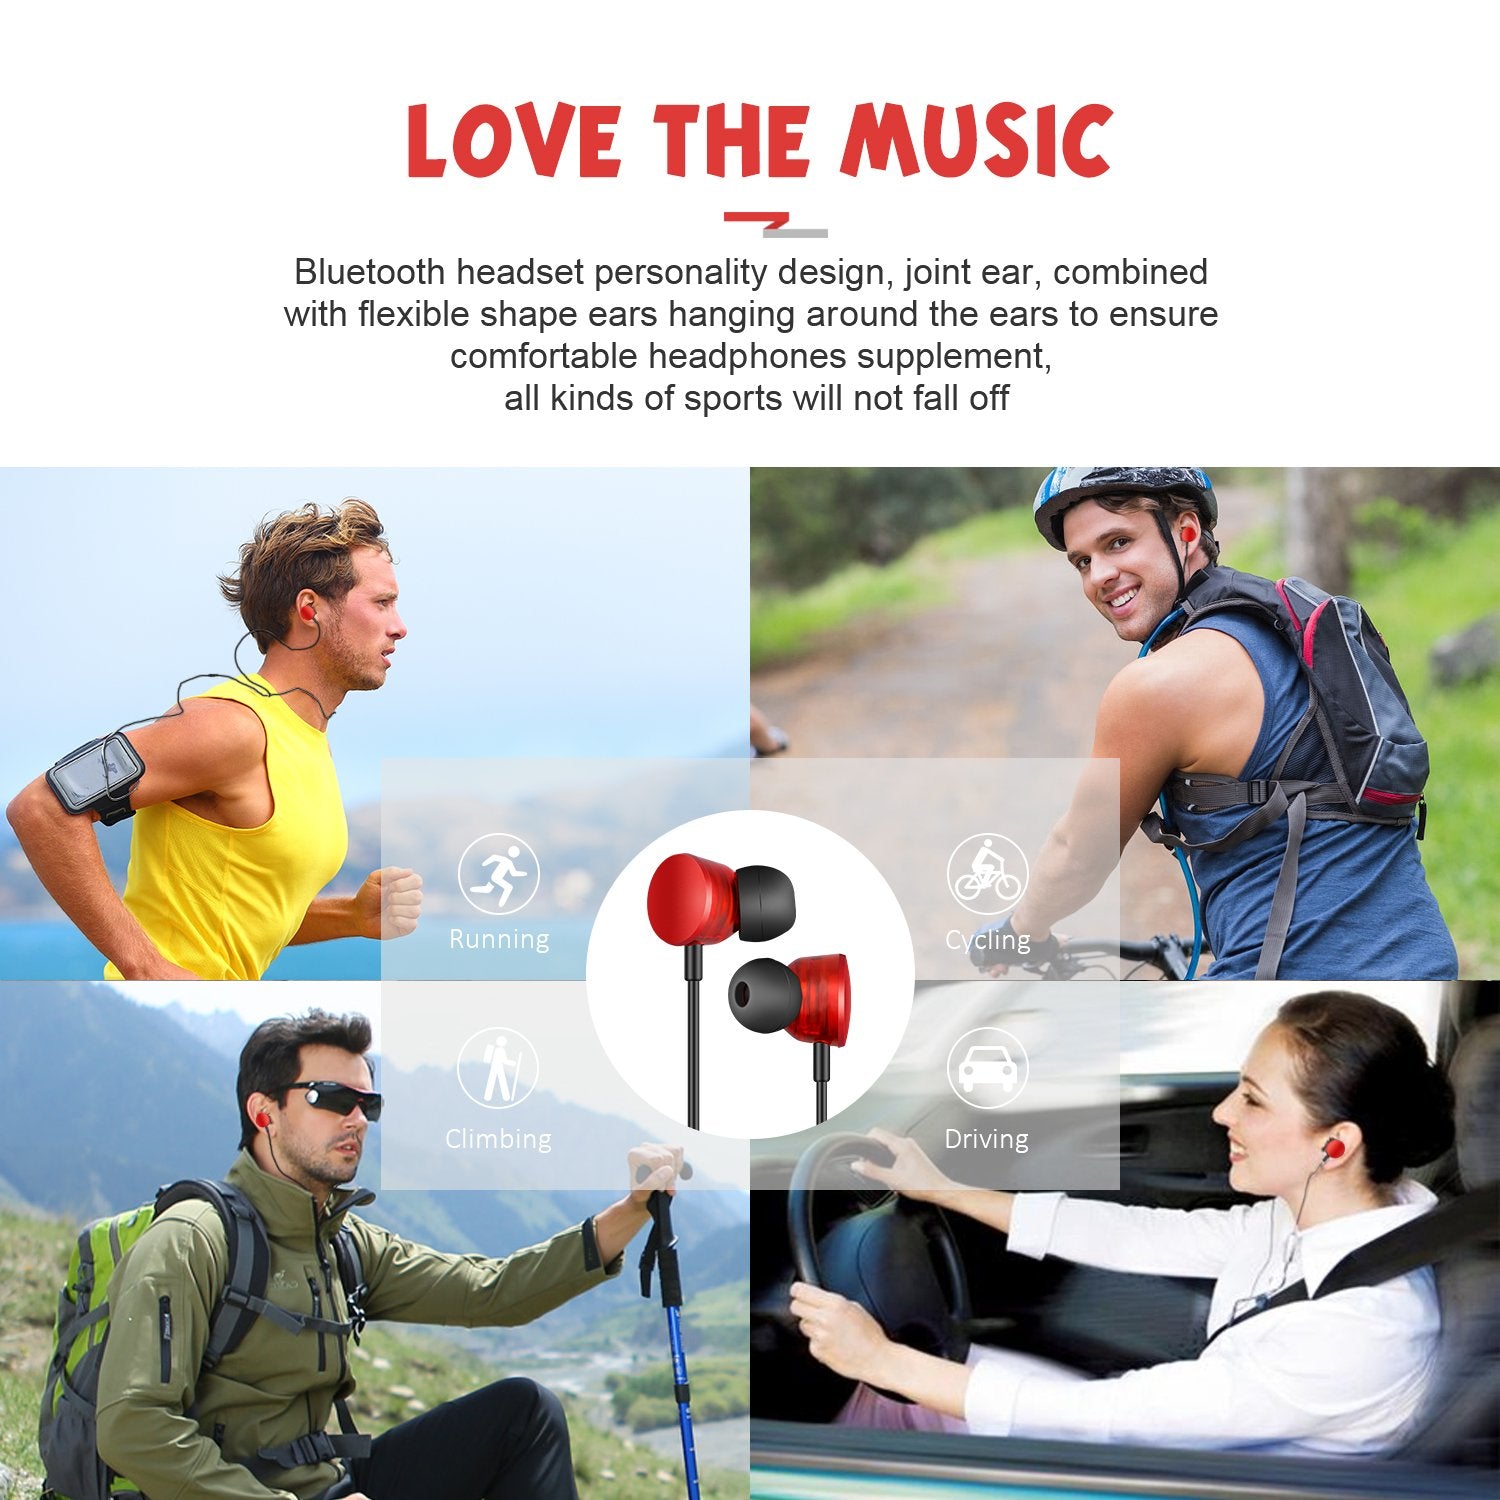 Areker Earphones Transparent Headphones with Microphone In-ear Fashionable Headset Heavy Deep Bass Noise Isolating Sports Headset for iPhone Android Smartphones Mac Laptop Tablets etc - Classic Red - Quntis